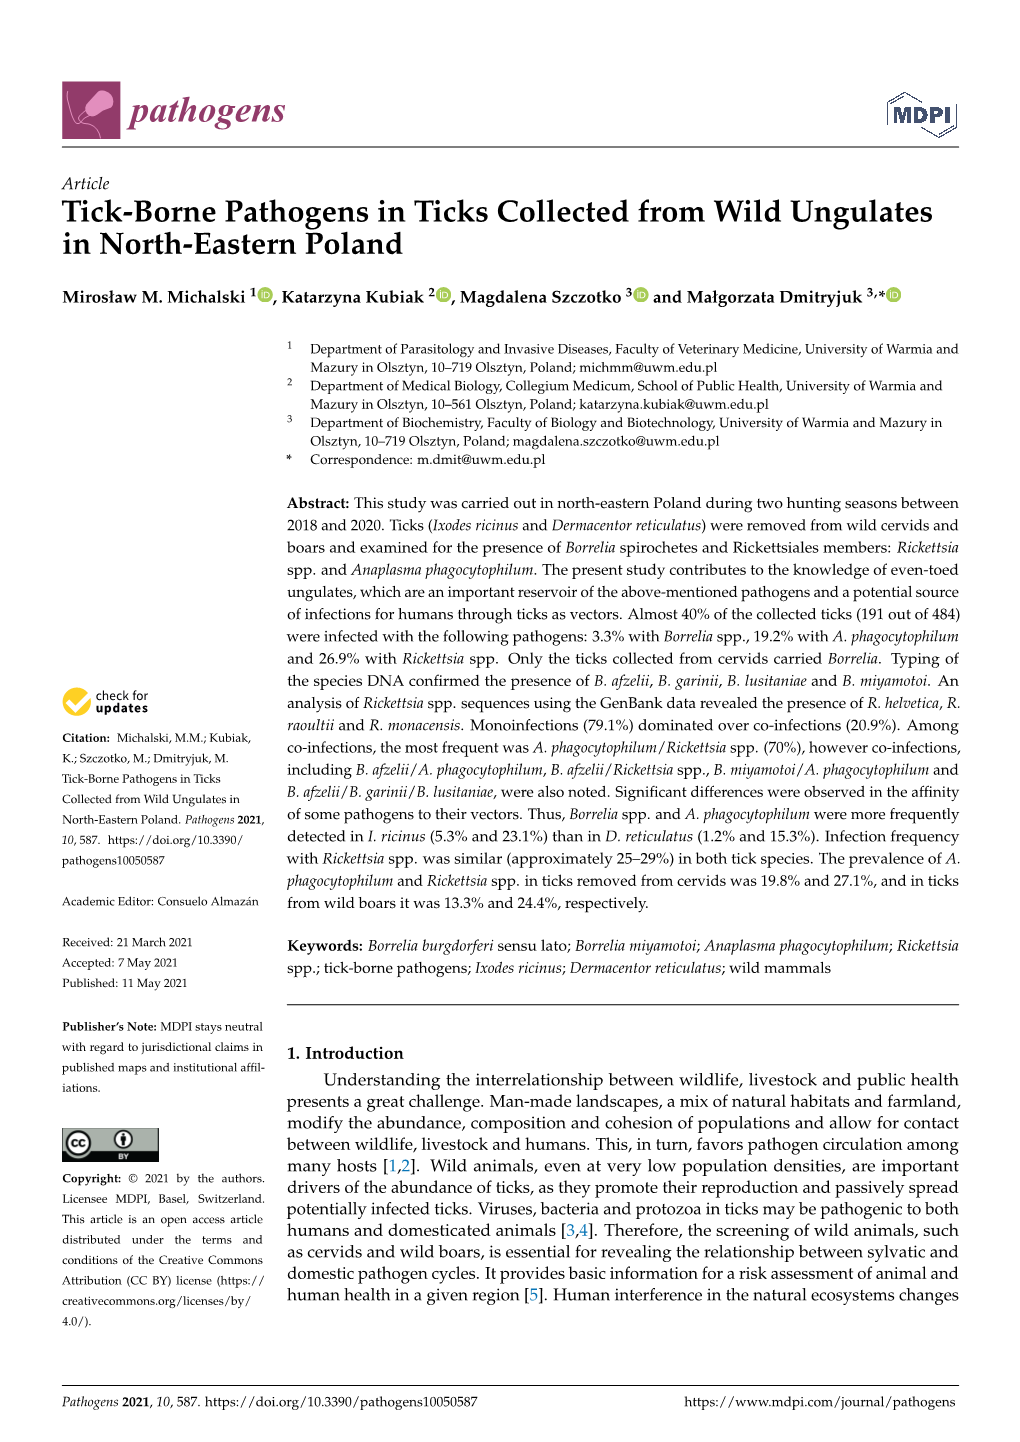 Tick-Borne Pathogens in Ticks Collected from Wild Ungulates in North-Eastern Poland